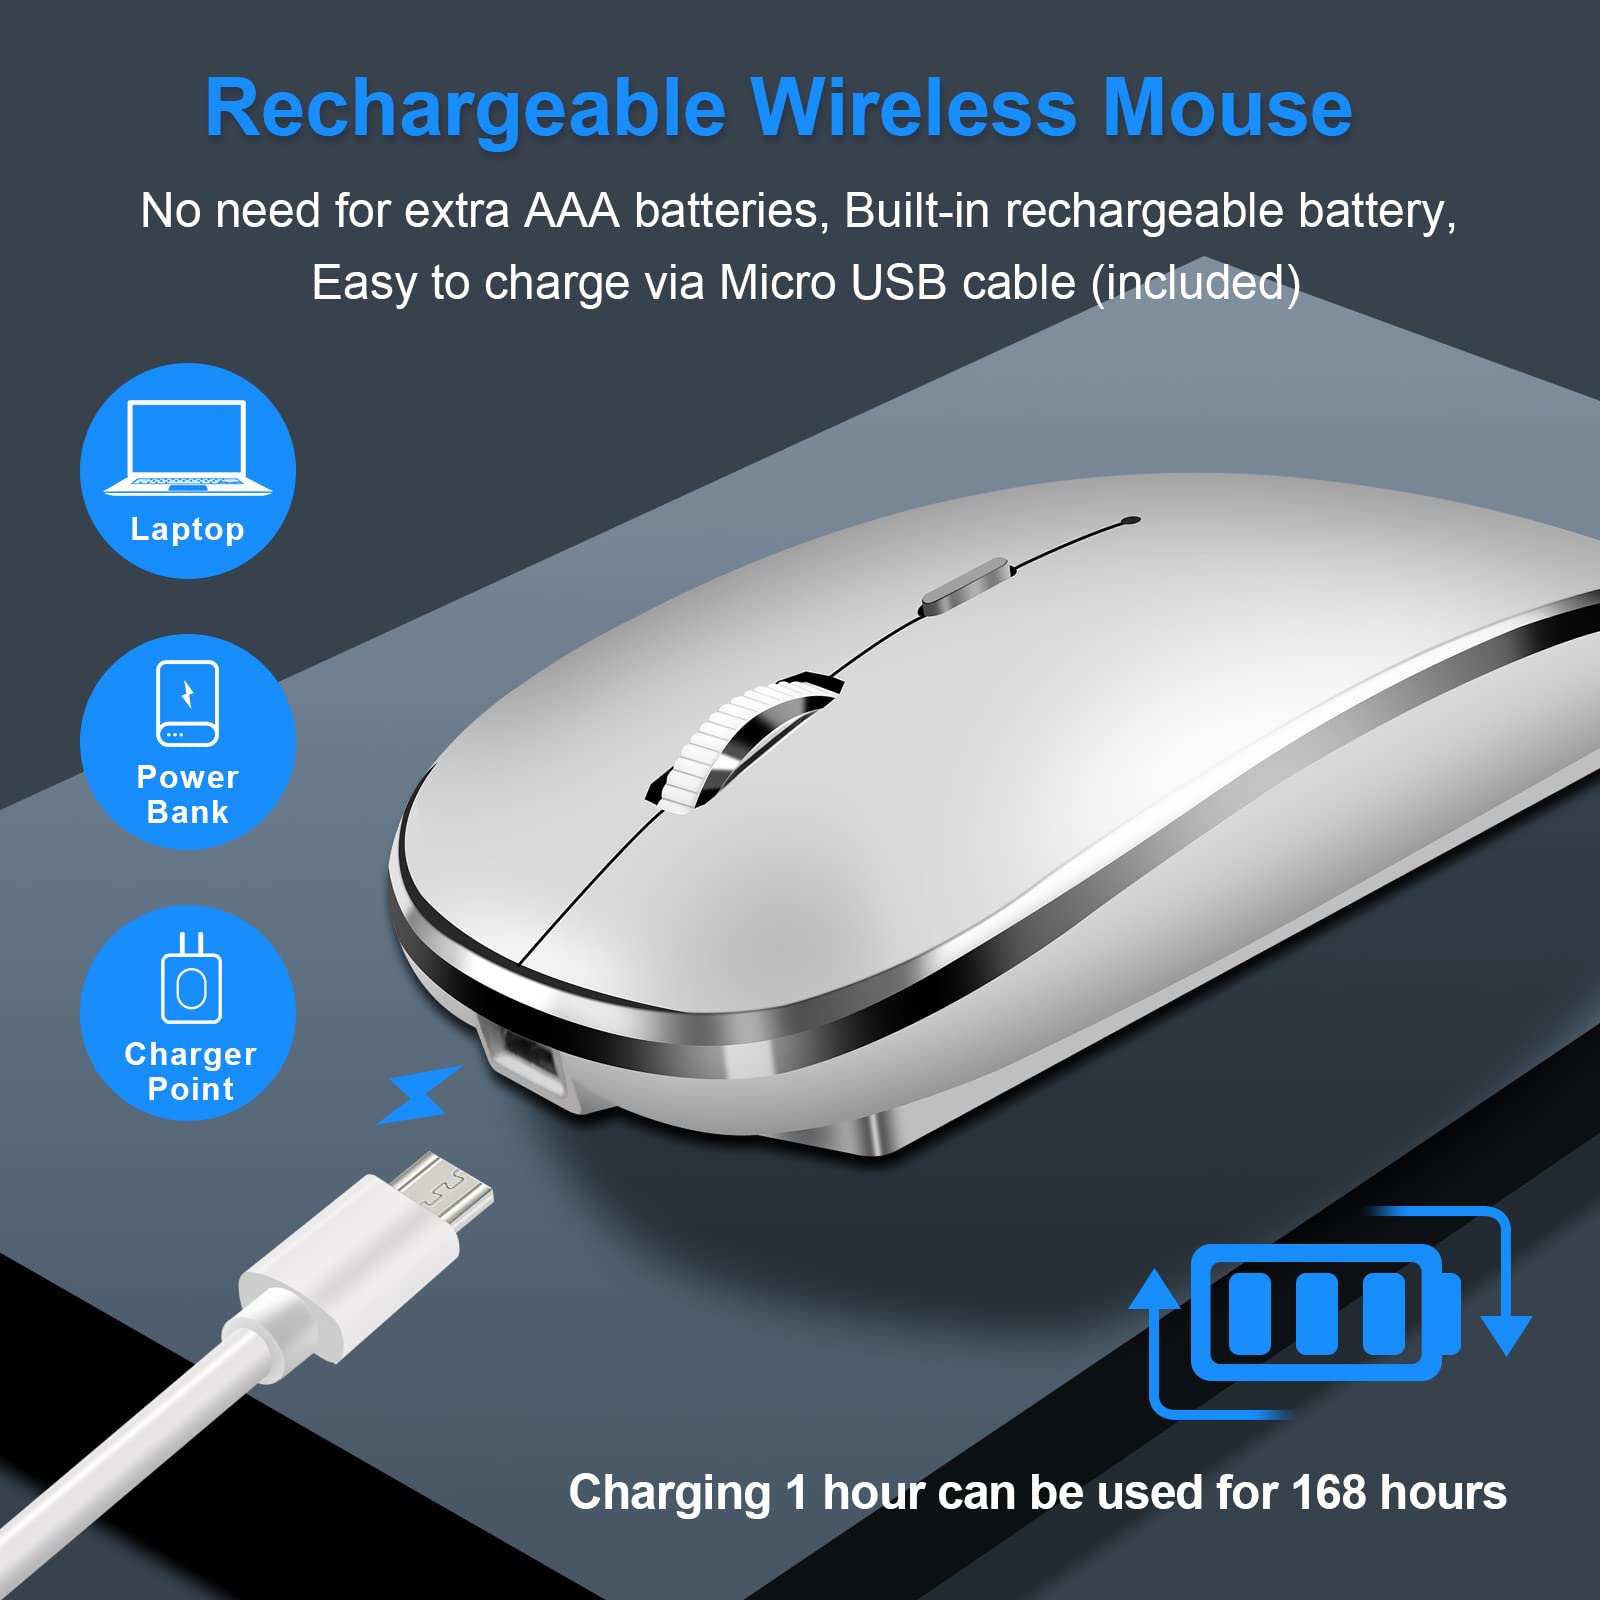 Wireless Mouse for Laptop, 2.4 GHz Cordless Mouse with USB/USB-C Dual Receiver for Computer, Rechargeable Portable Mouse Compatible with Apple MacBook Air/Pro,iPad,Mac,Chromebook,Tablet,PC (Silver)